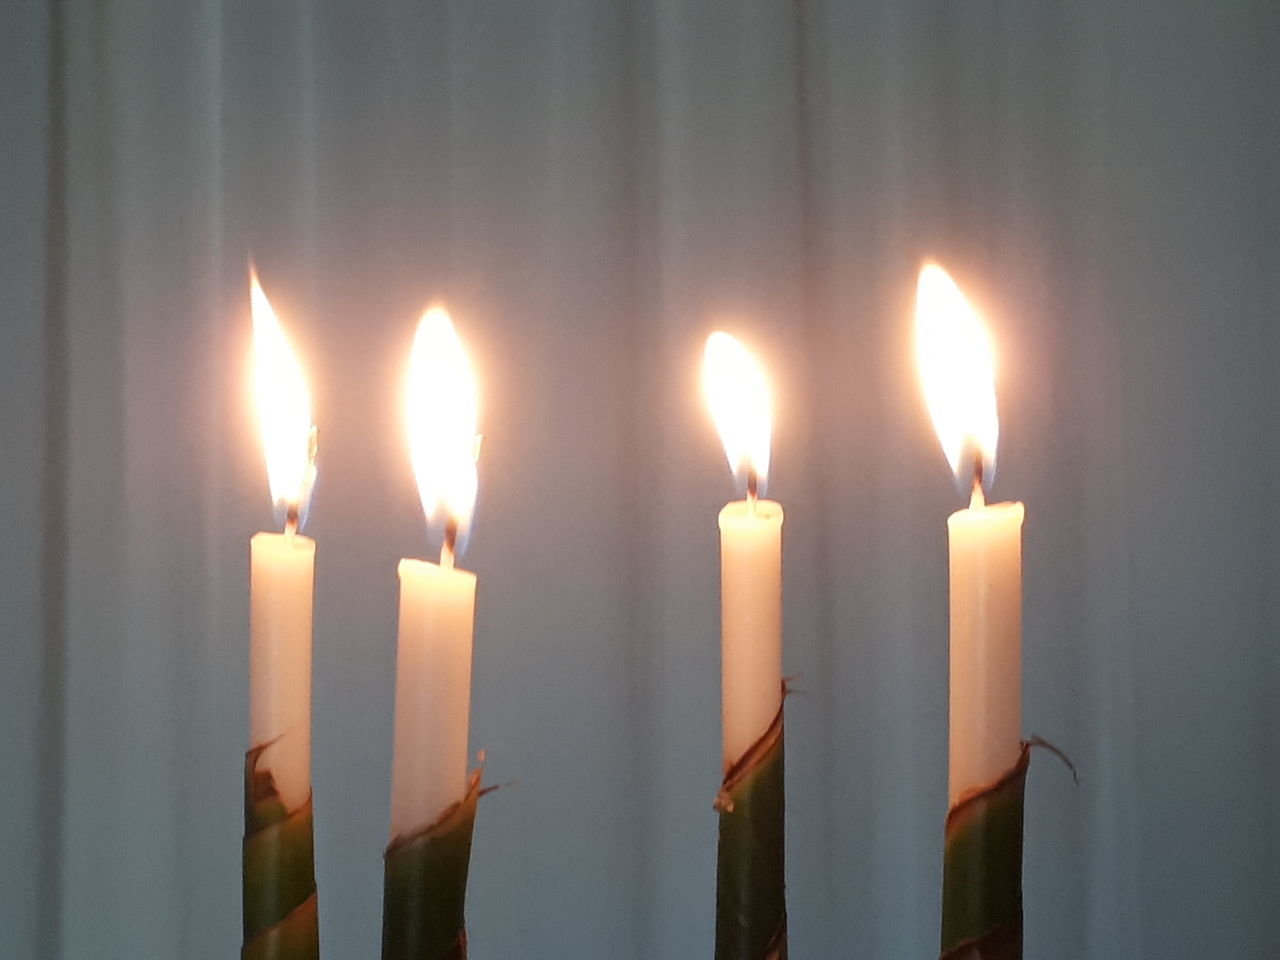 CLOSE-UP OF CANDLES BURNING AGAINST WALL